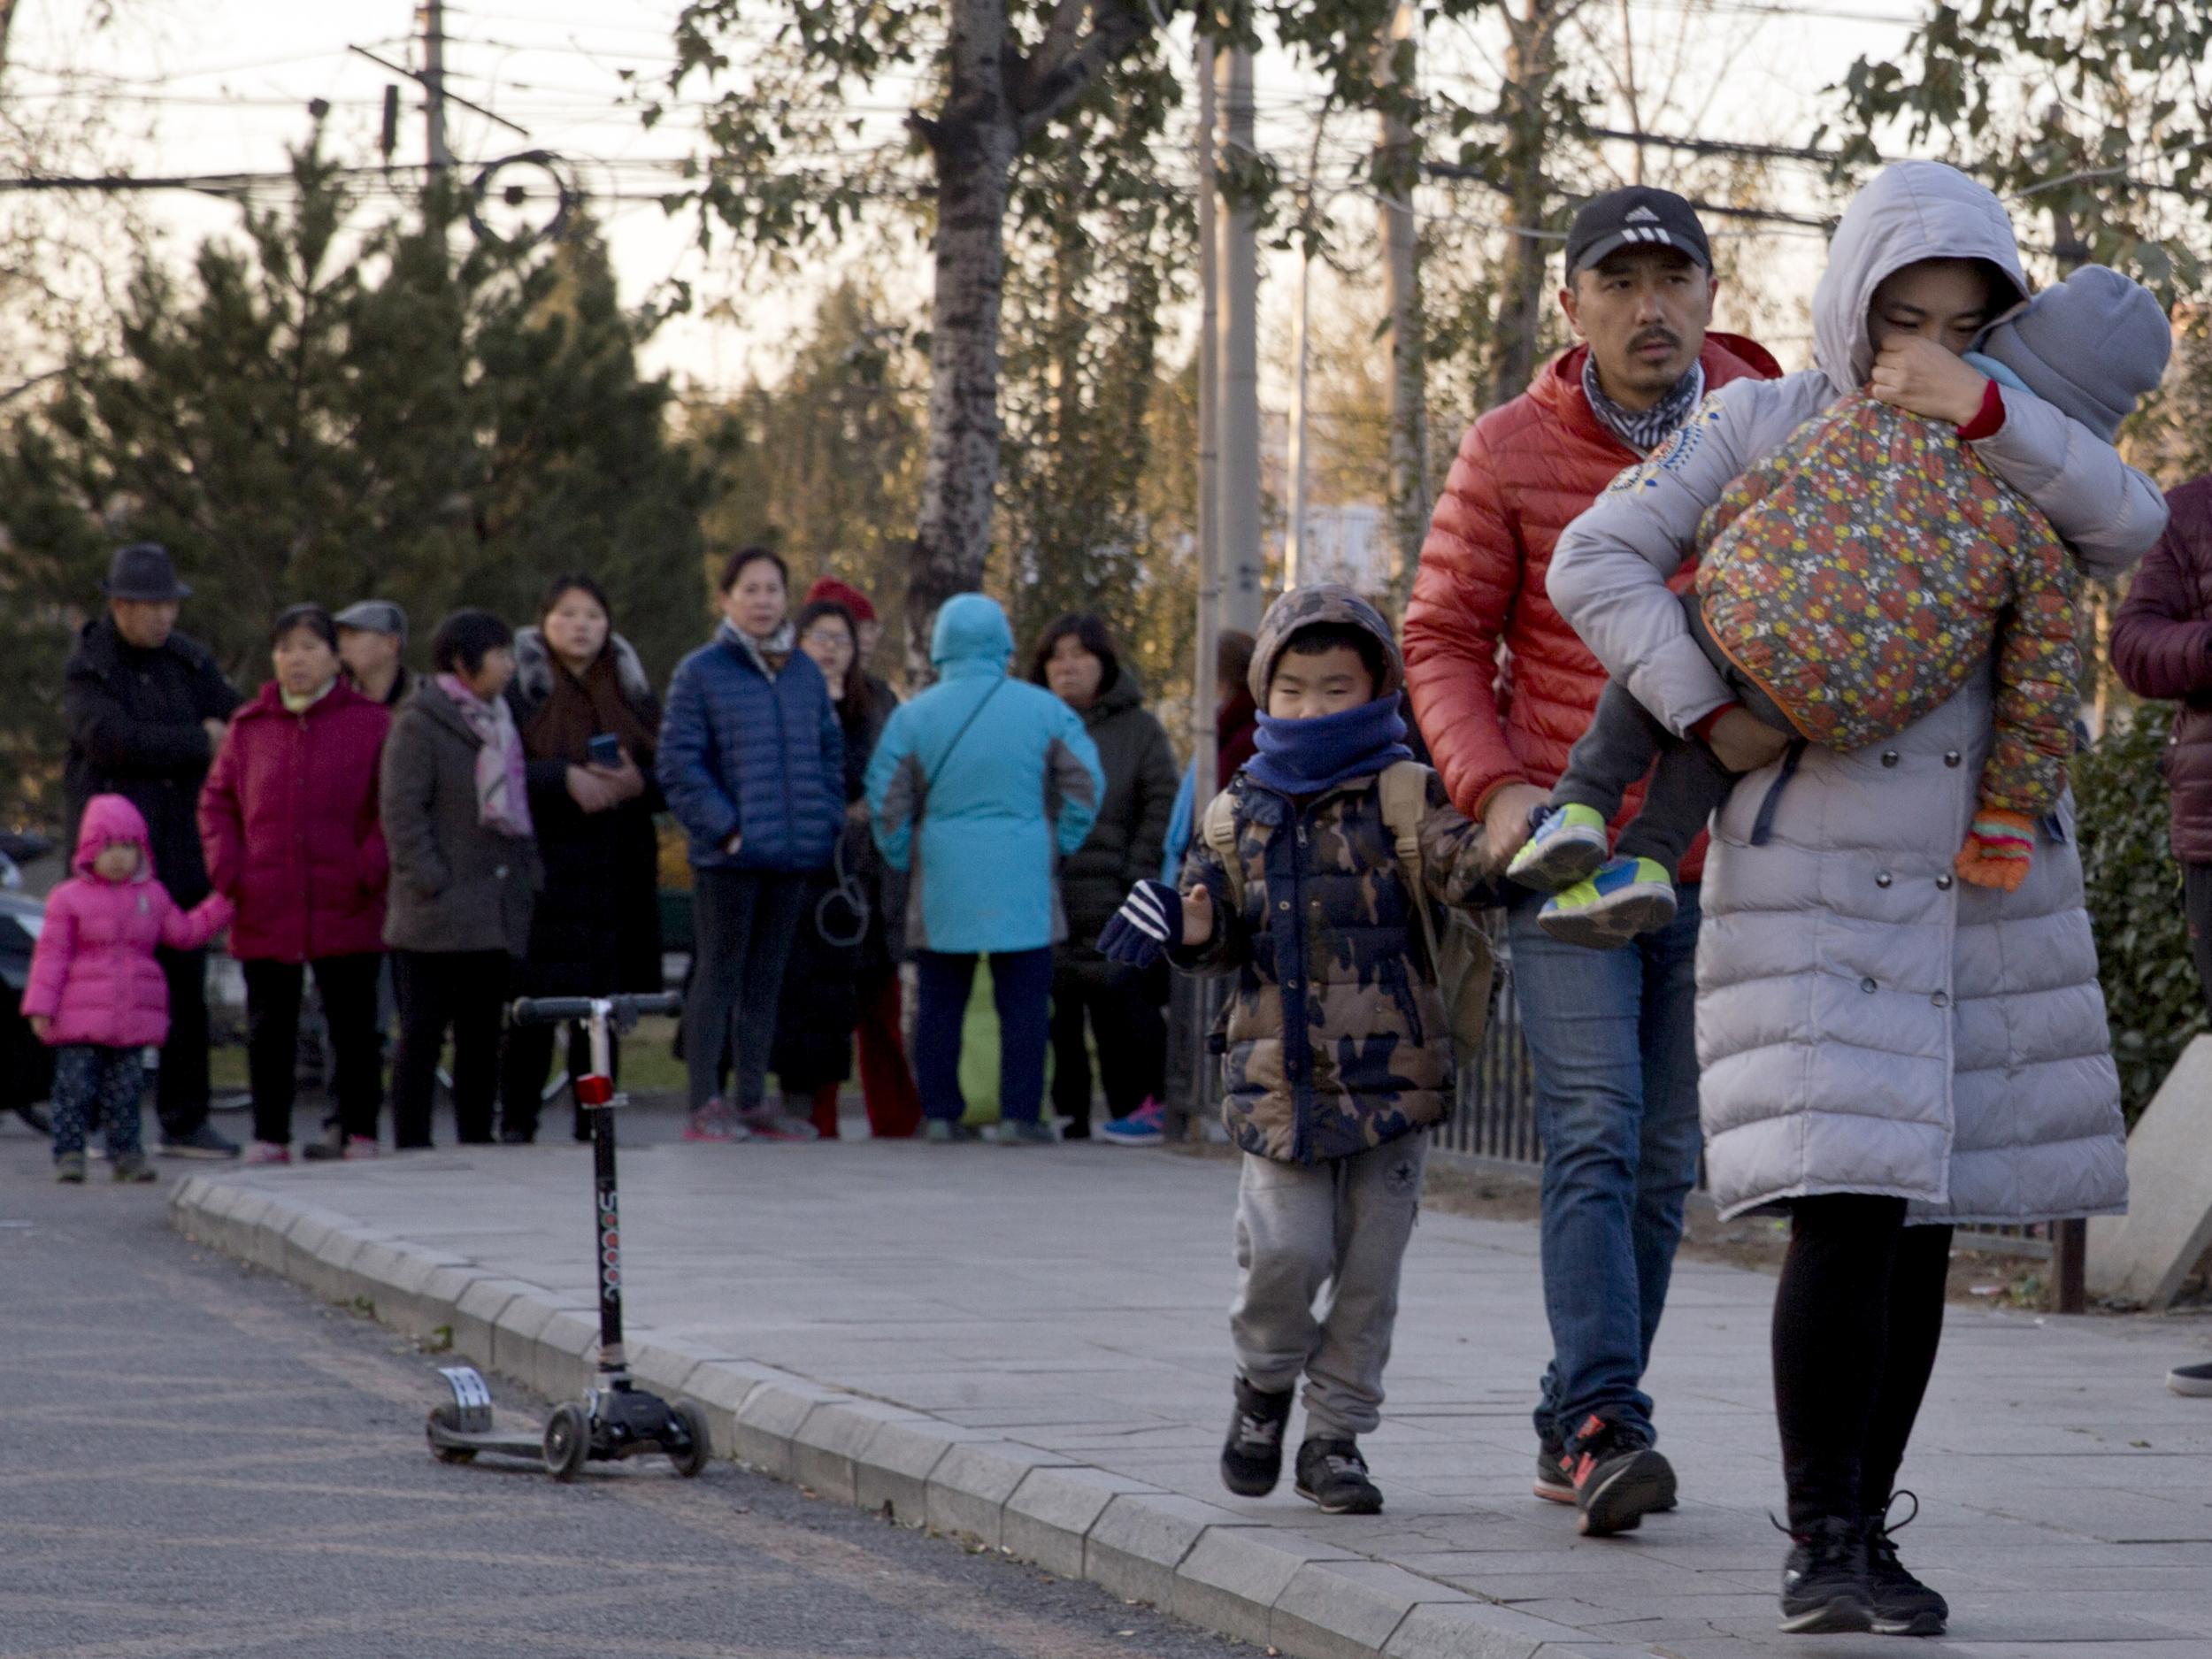 A woman carries a child as they arrive at the RYB kindergarten in Beijing